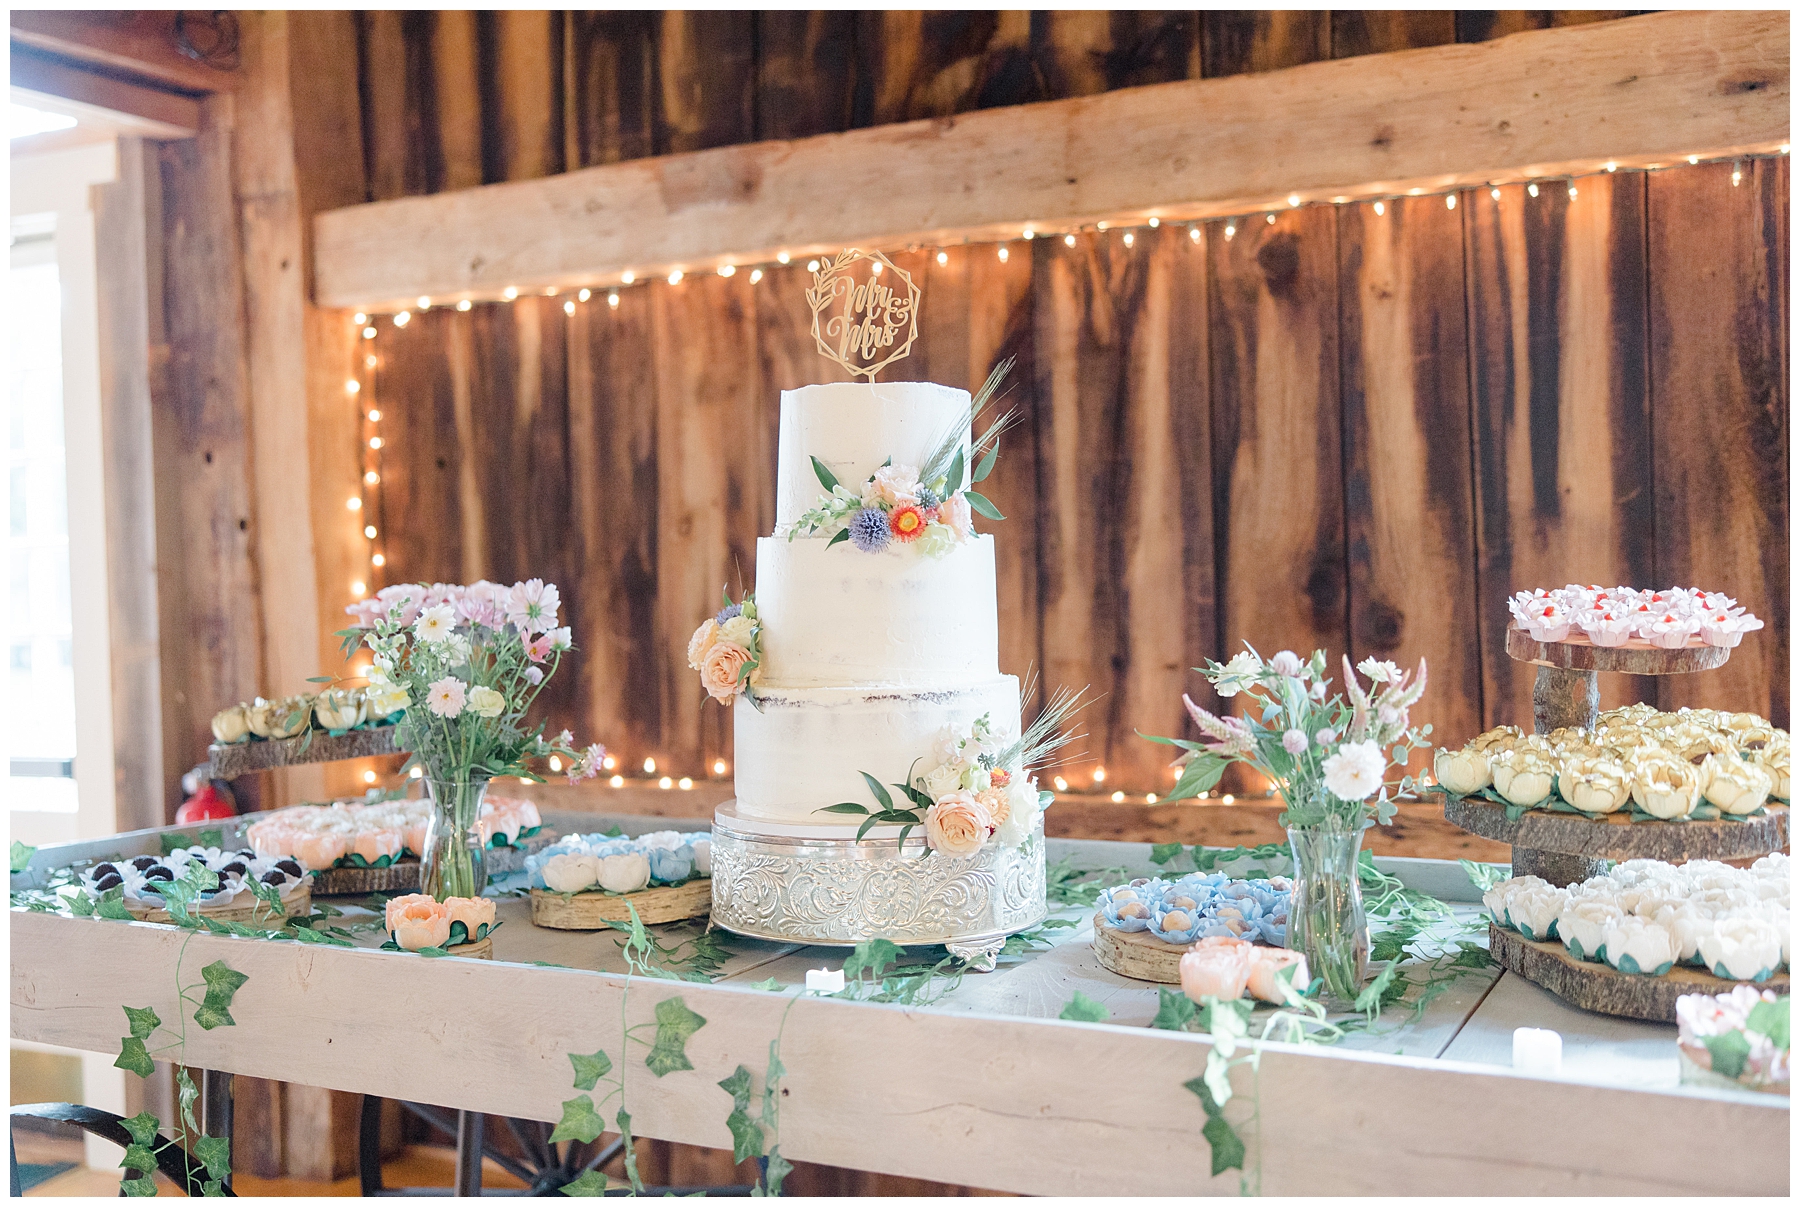 wedding cake and dessert table from Elegant New Hampshire Wedding at The Barn at Powder Major's Farm